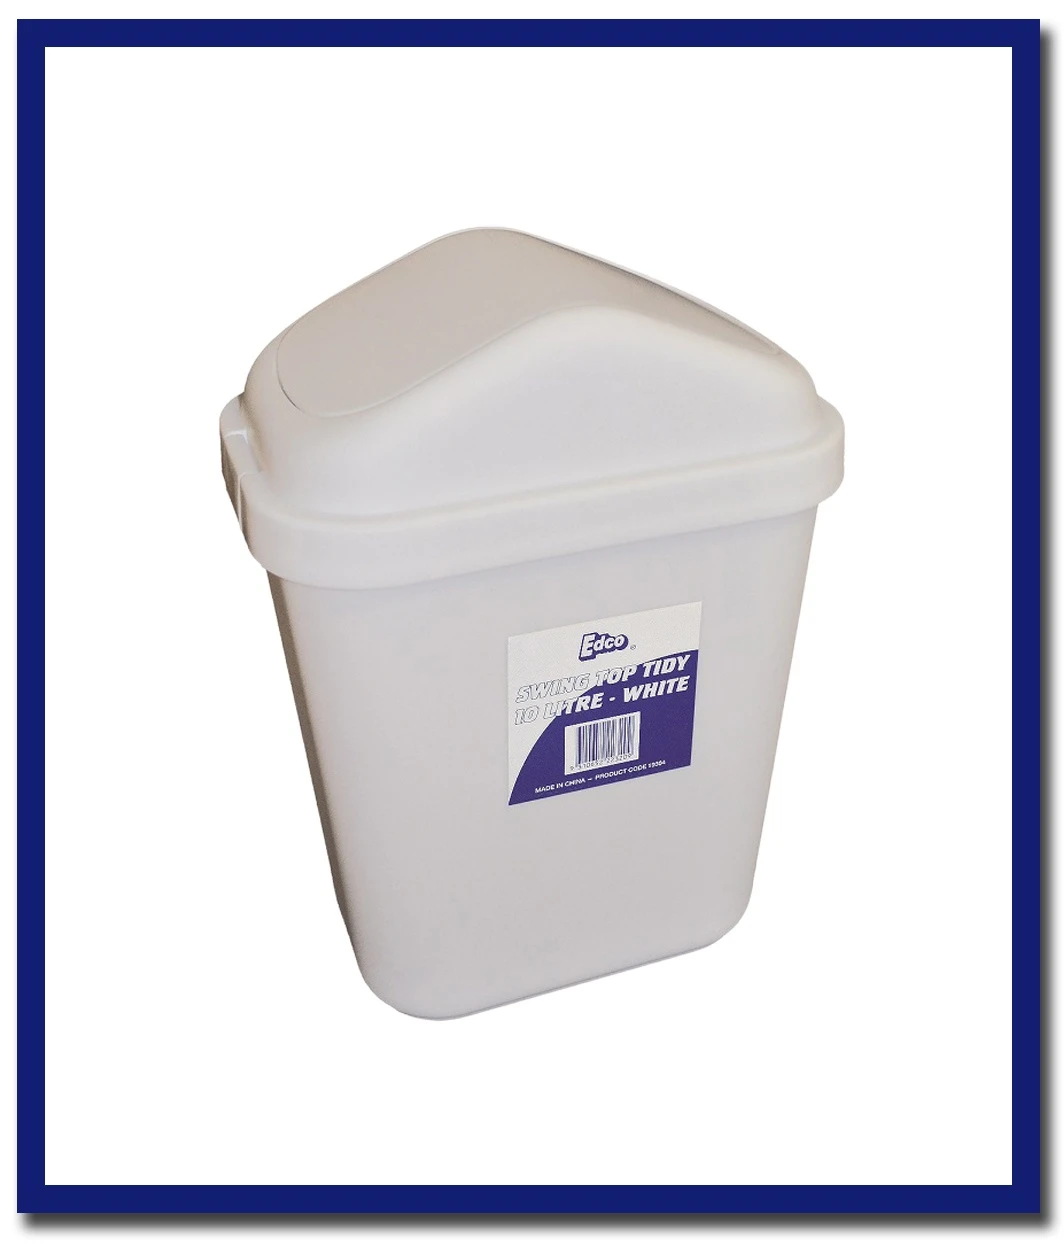 Edco Swing Top Tidy White - 1 Unit - Stone Doctor Australia - Cleaning Accessories > Bins > Swing Top Tidy